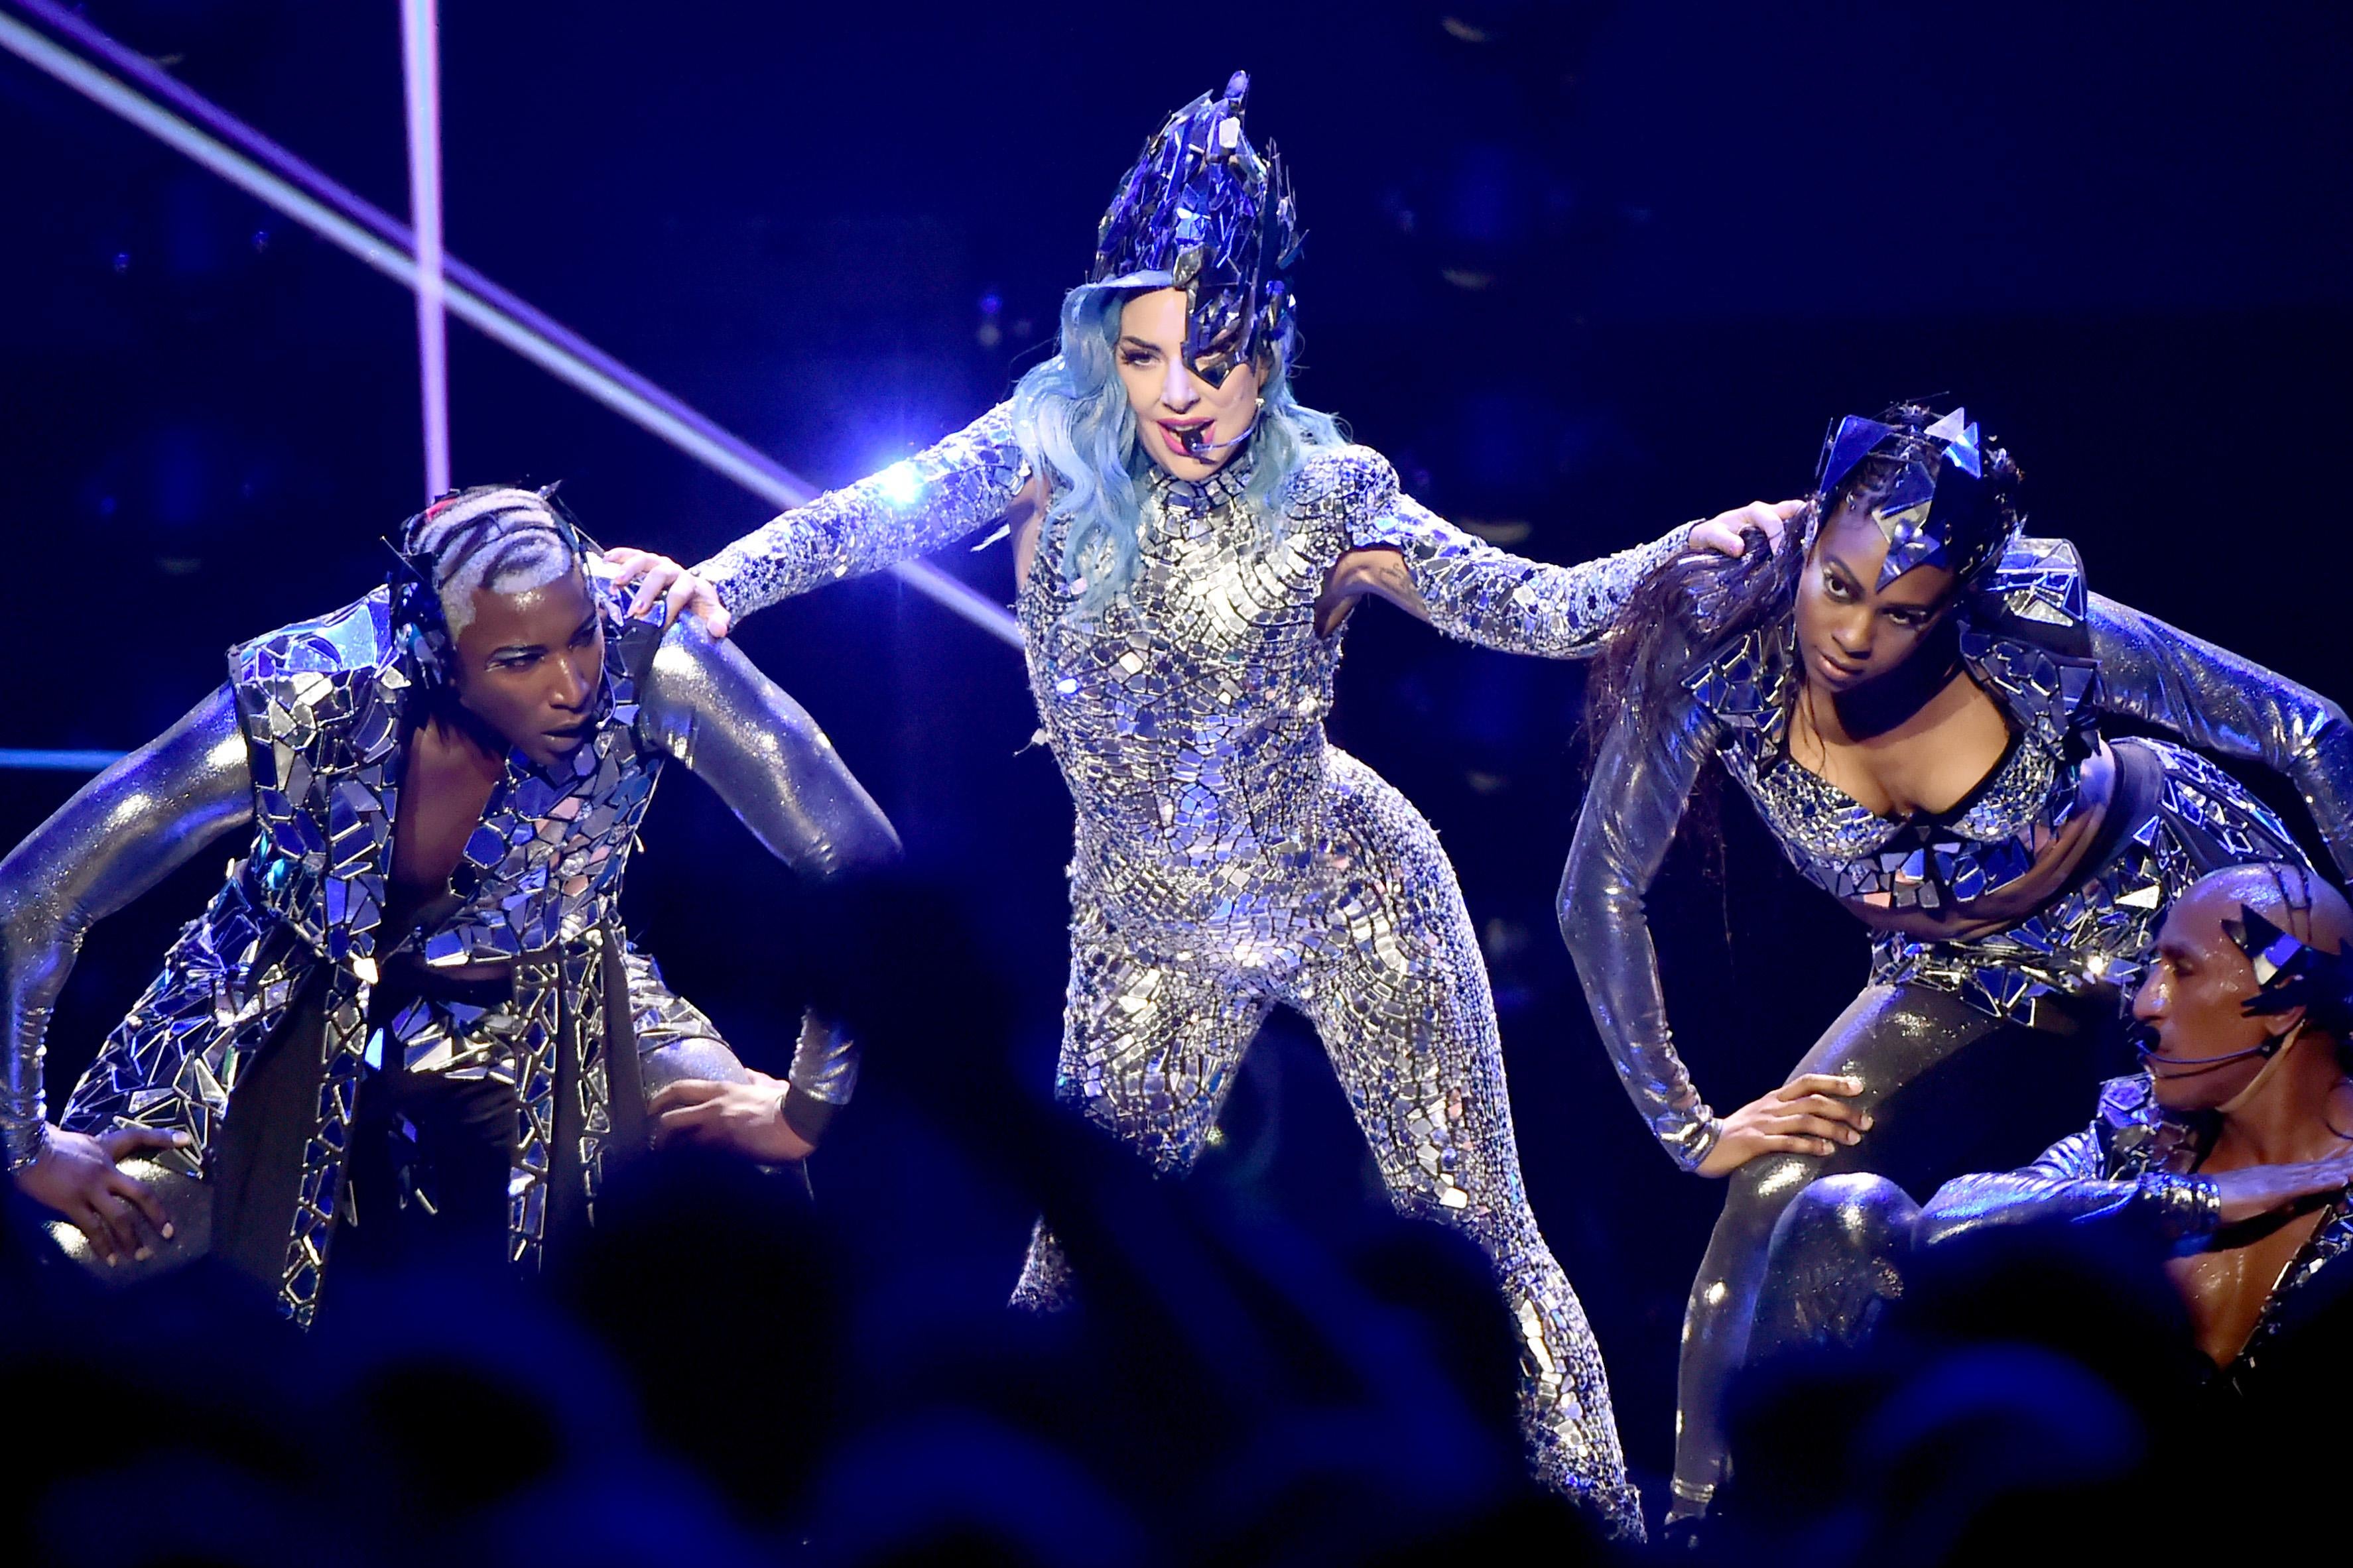 Lady Gaga performs onstage in a sparkling suit with backup dancers.